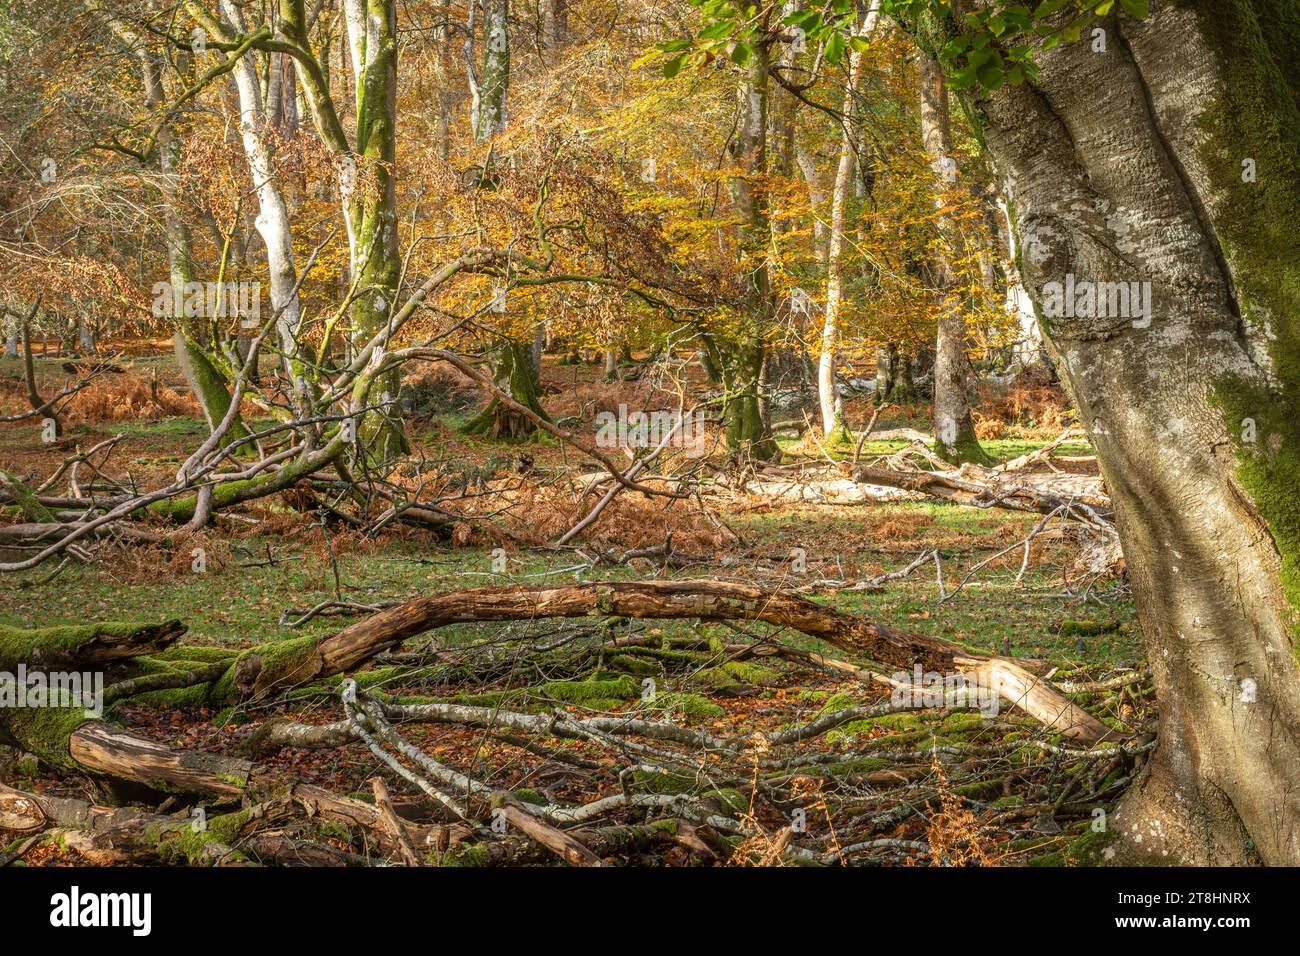 Autumn woodland scene in Bolderwood in the New Forest National Park, Hampshire, England, UK, with veteran beech trees and deadwood Stock Photo